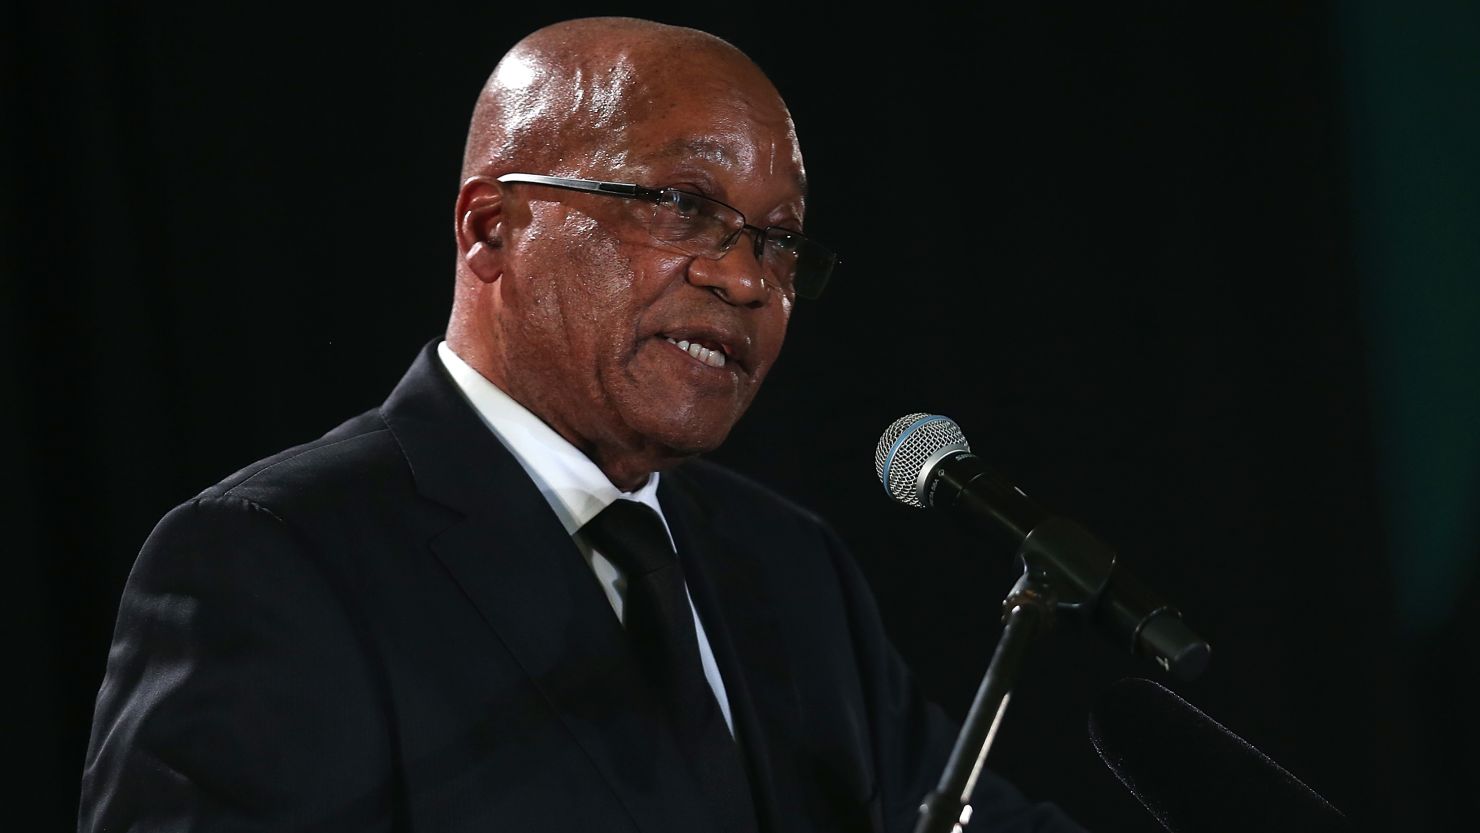 Last week, South African President Jacob Zuma offered to repay some of the funds that had been used to renovate his private residence. 